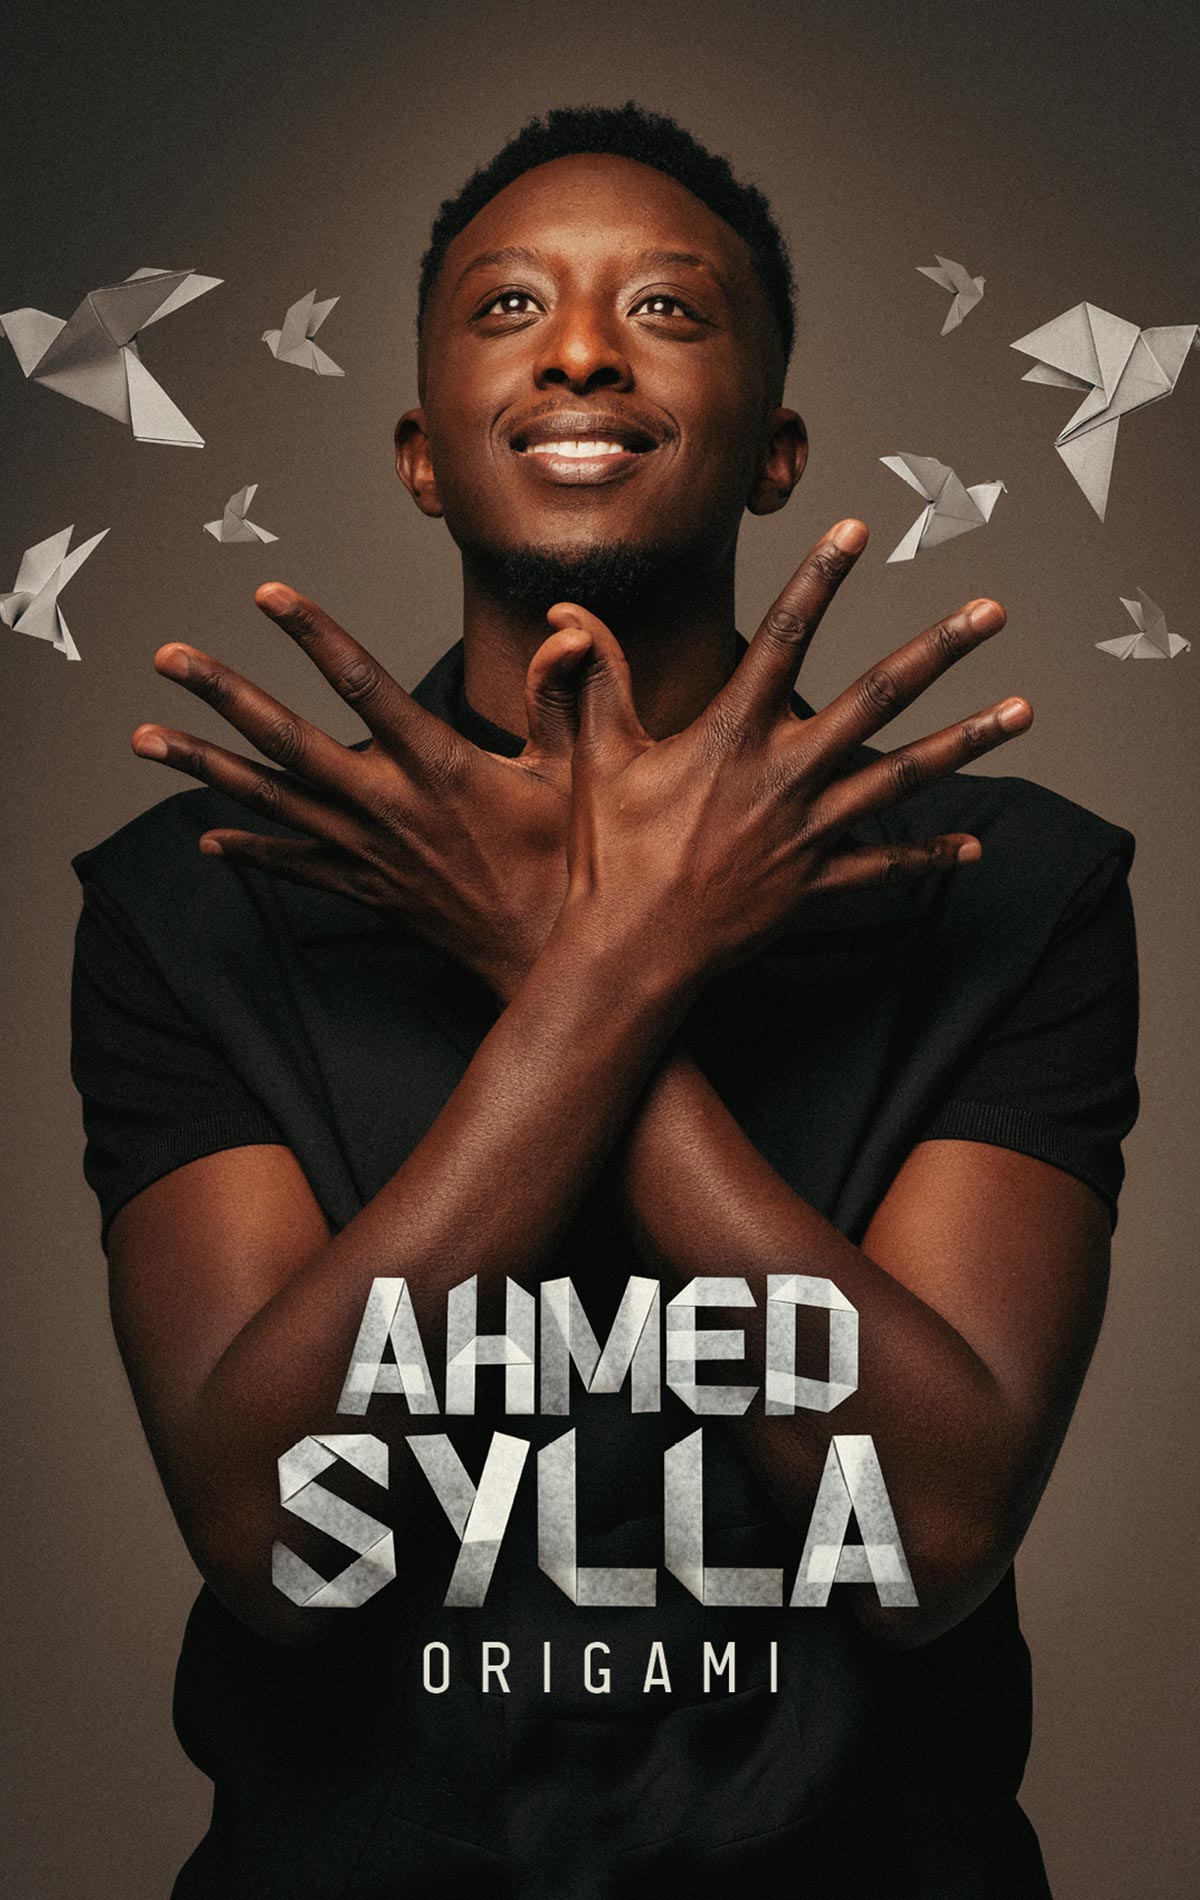 Ahmed Sylla at Narbonne Arena Tickets